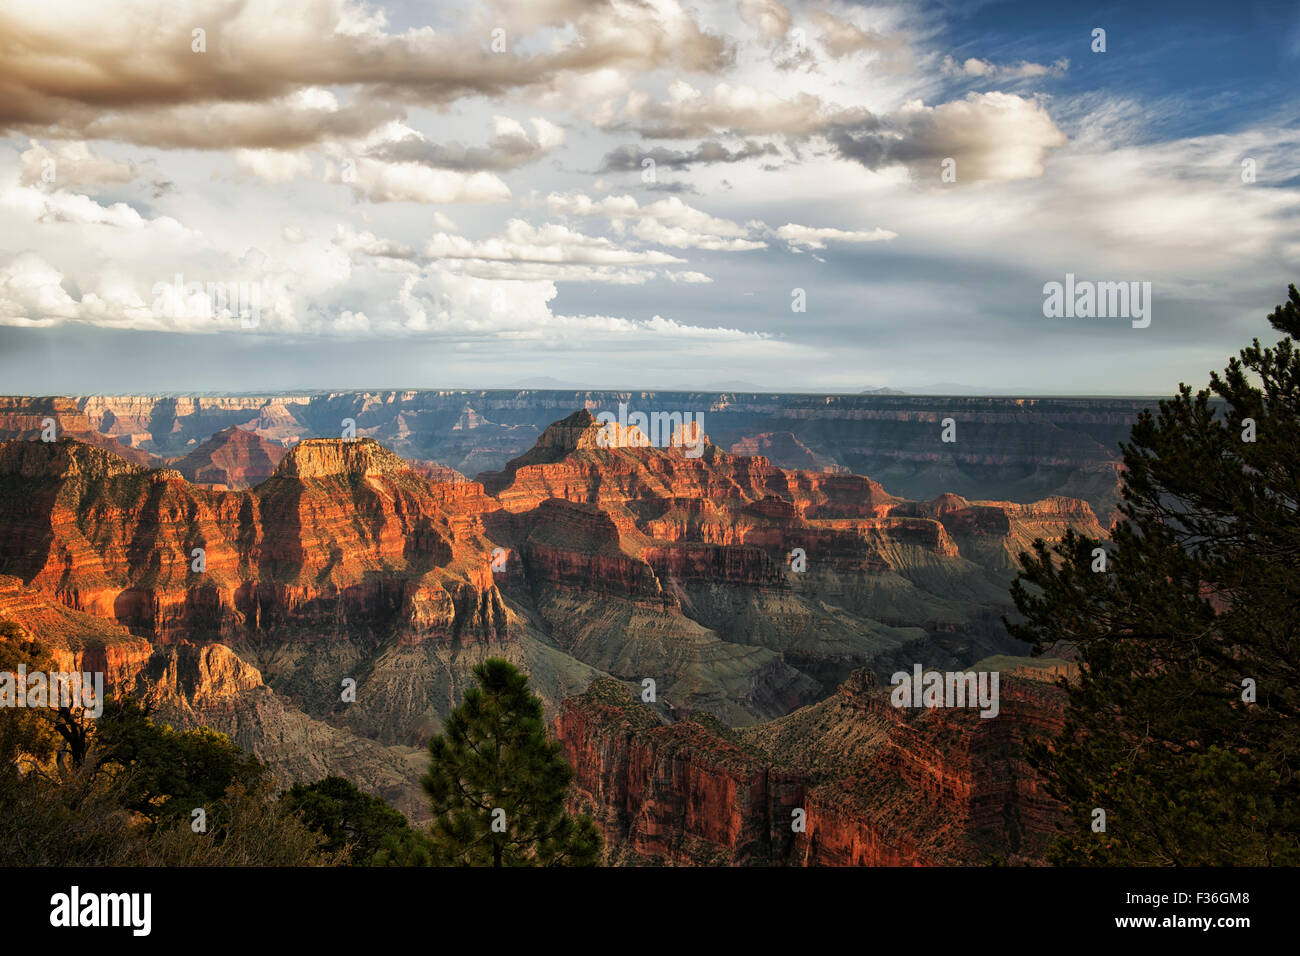 Summer evening storm clouds gather over the Three Temples and the North Rim of Arizona's Grand Canyon National Park. Stock Photo